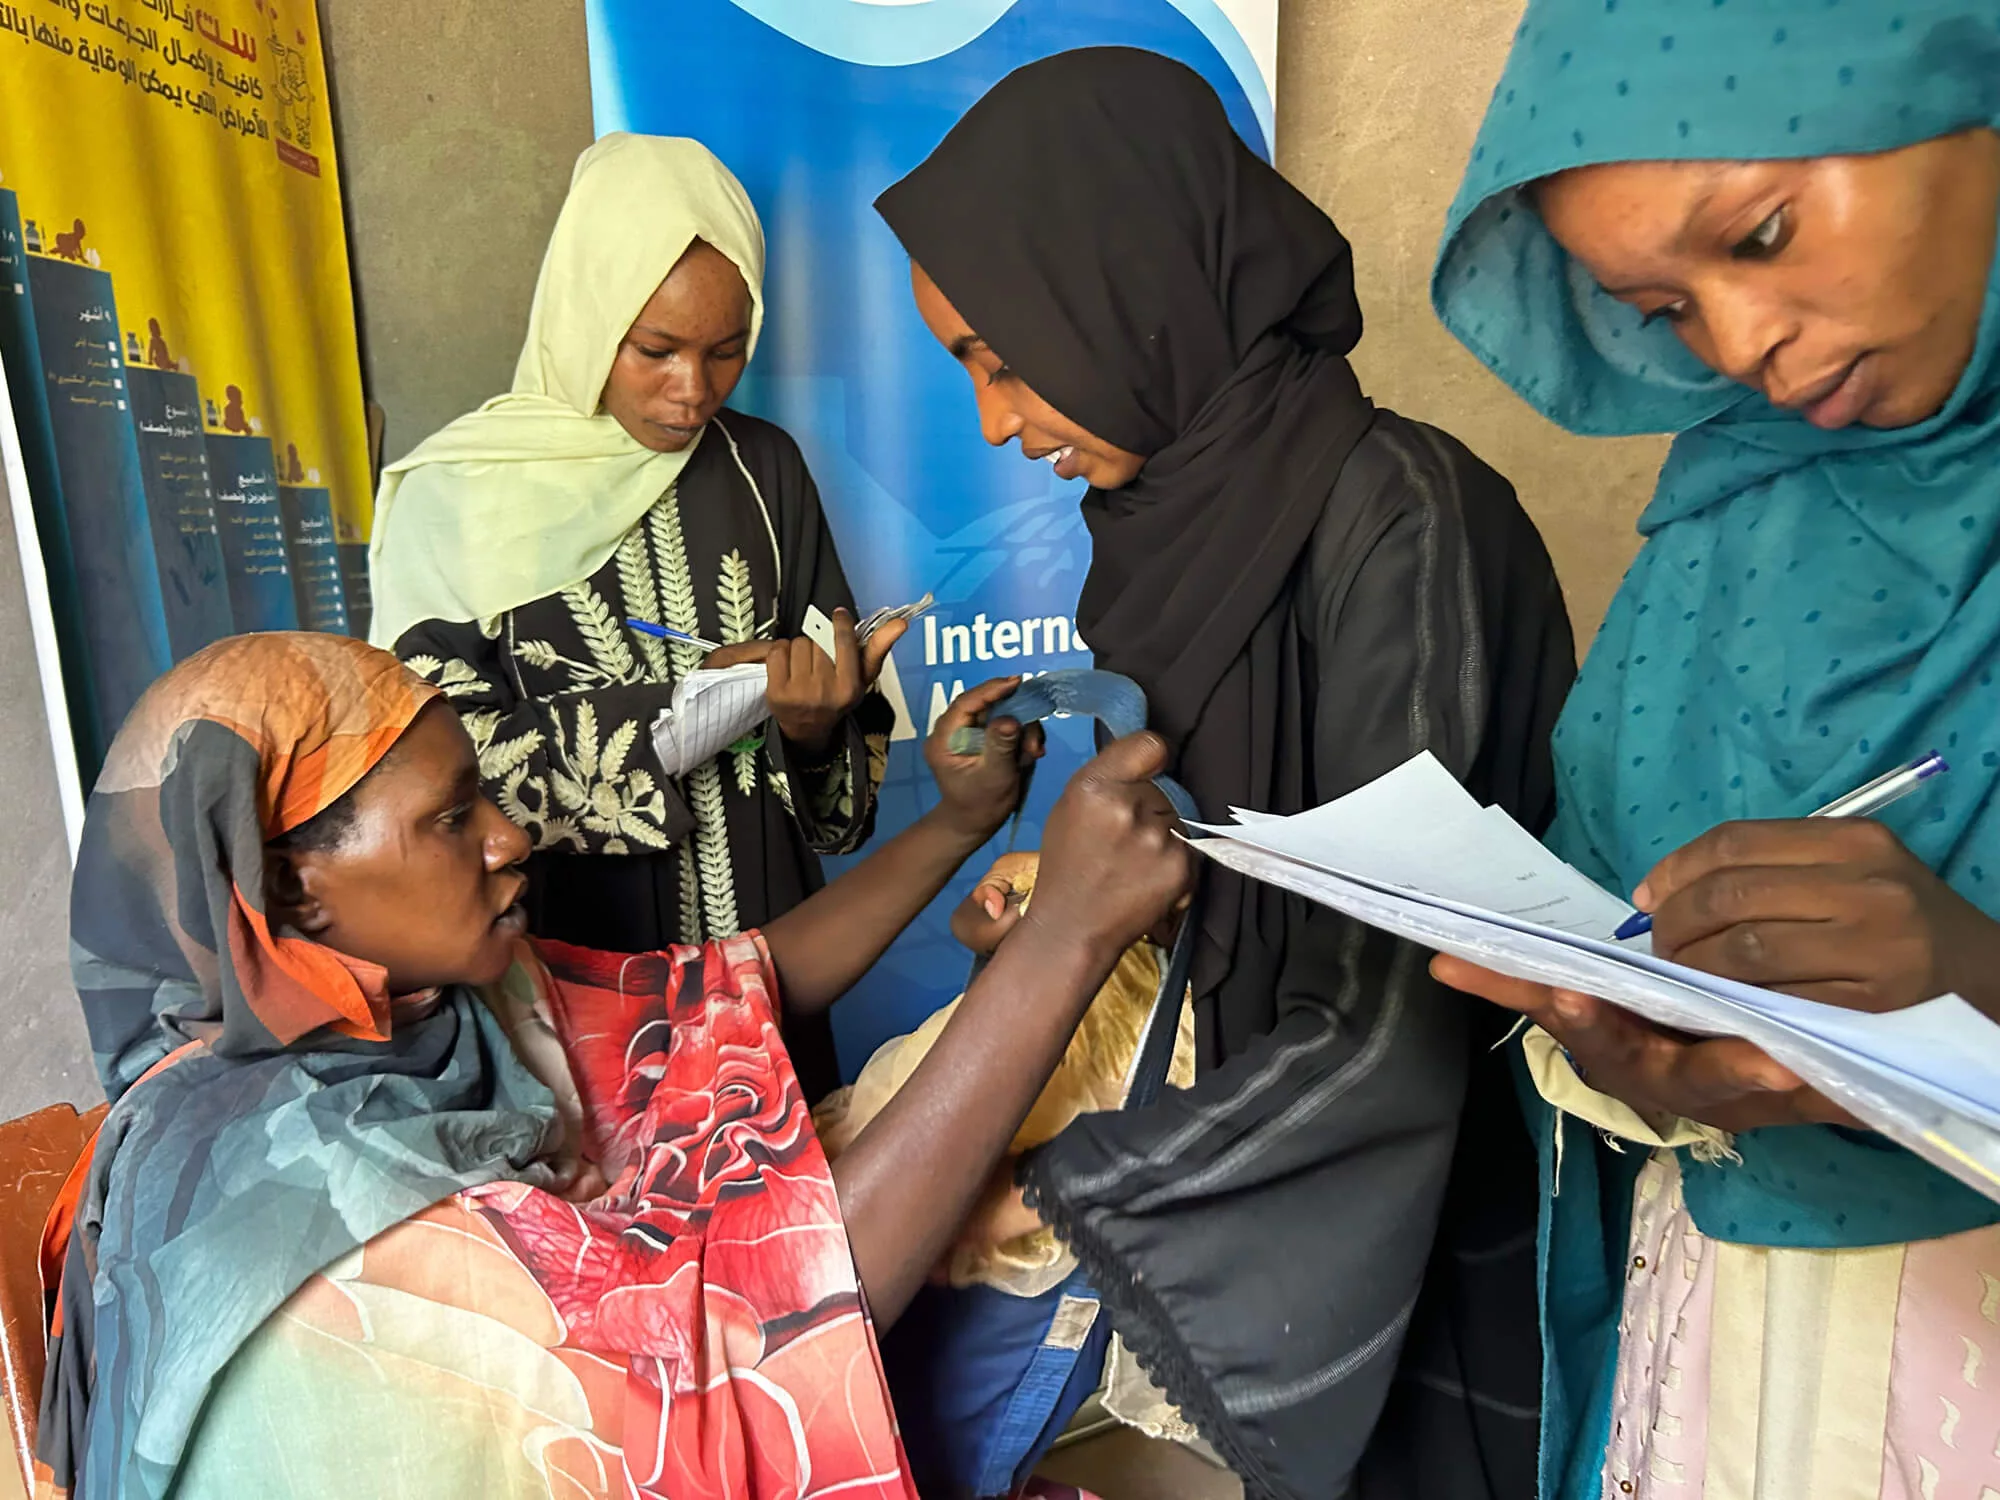 Namariq Elhadi Nasir takes Habooba’s height and weight measurements to determine if she is malnourished, while Safa Jaafar Abdul Kareem and Nidaa Muhktar Billo Osman—who are Therapeutic Nutrition Officers with International Medical Corps—fill out paperwork and bring supplies.